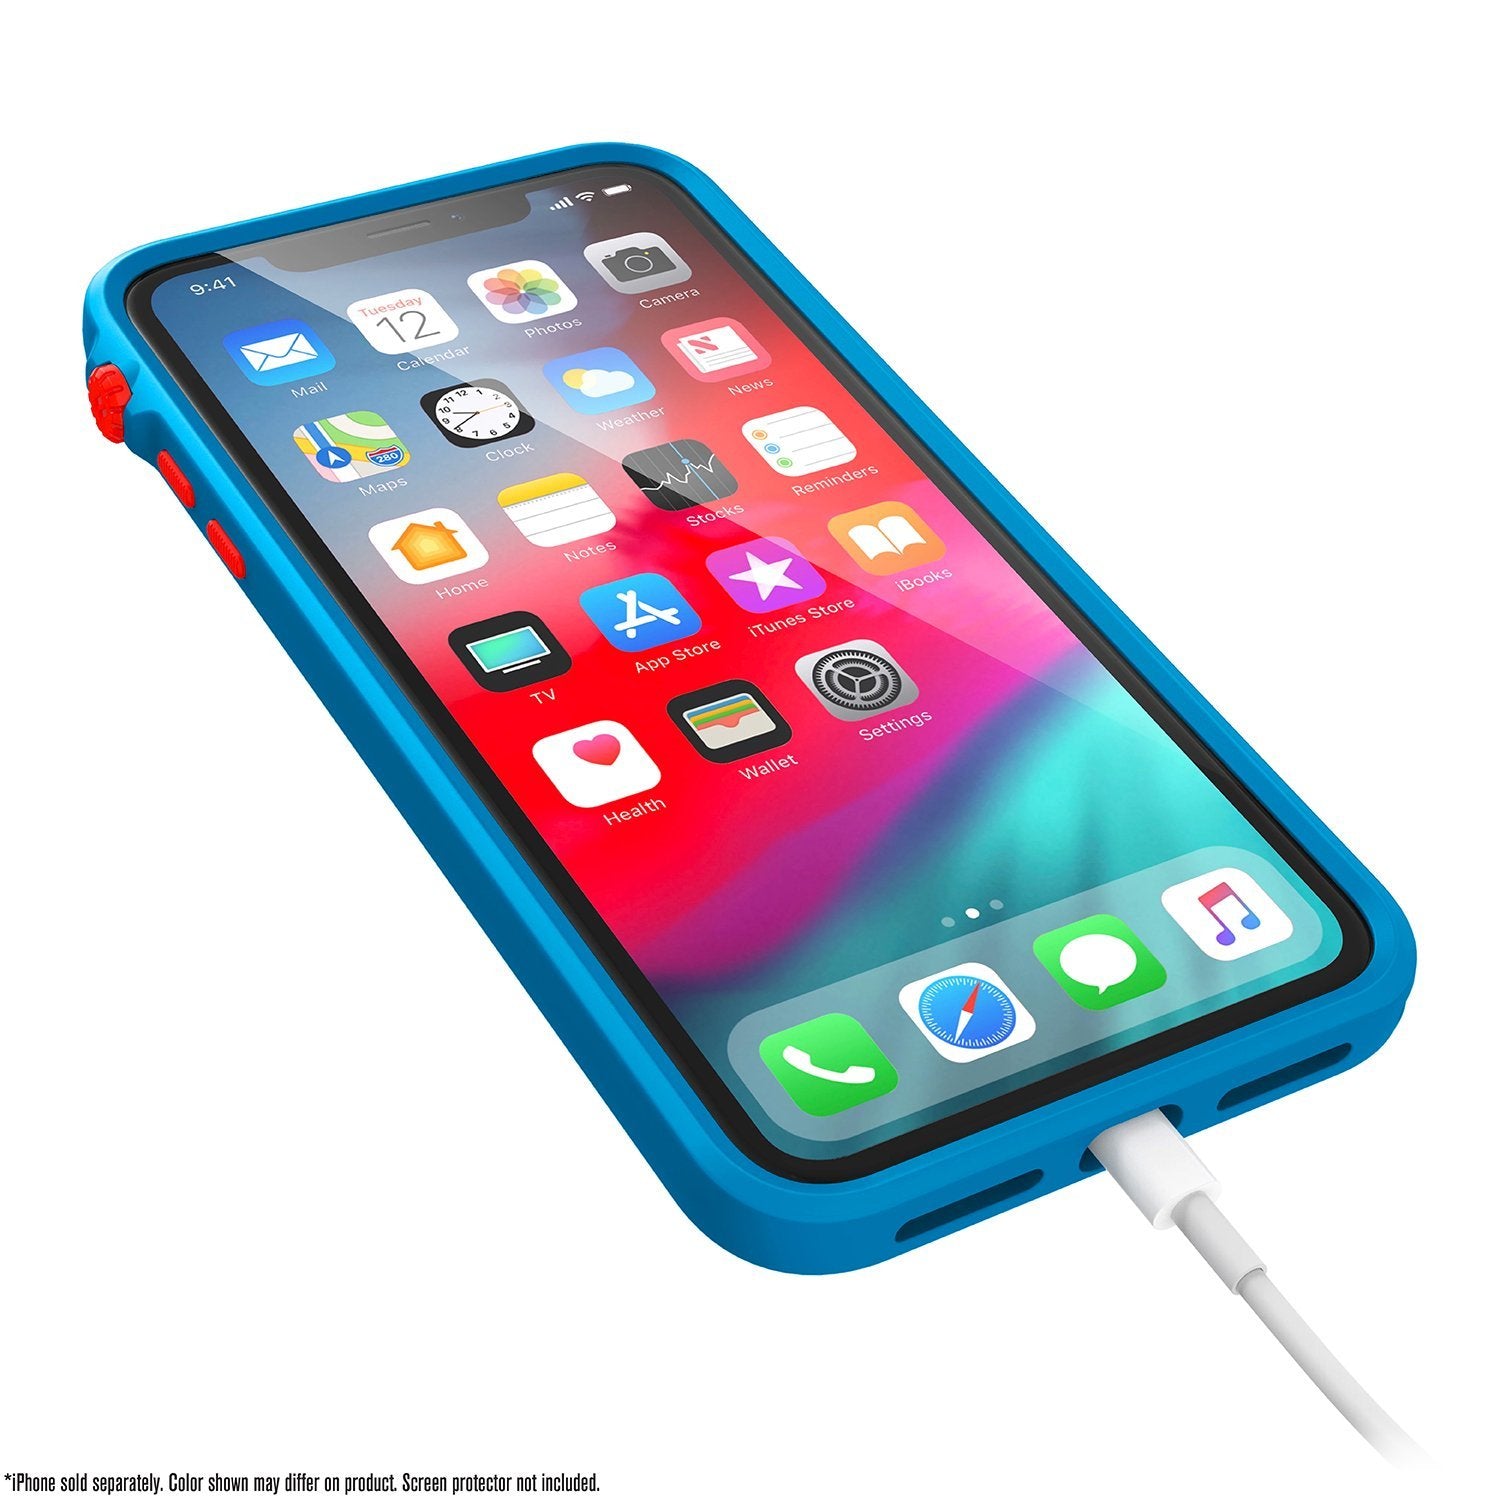 CATDRPHXTBFCL | Impact Protection Case for iPhone Xs Max